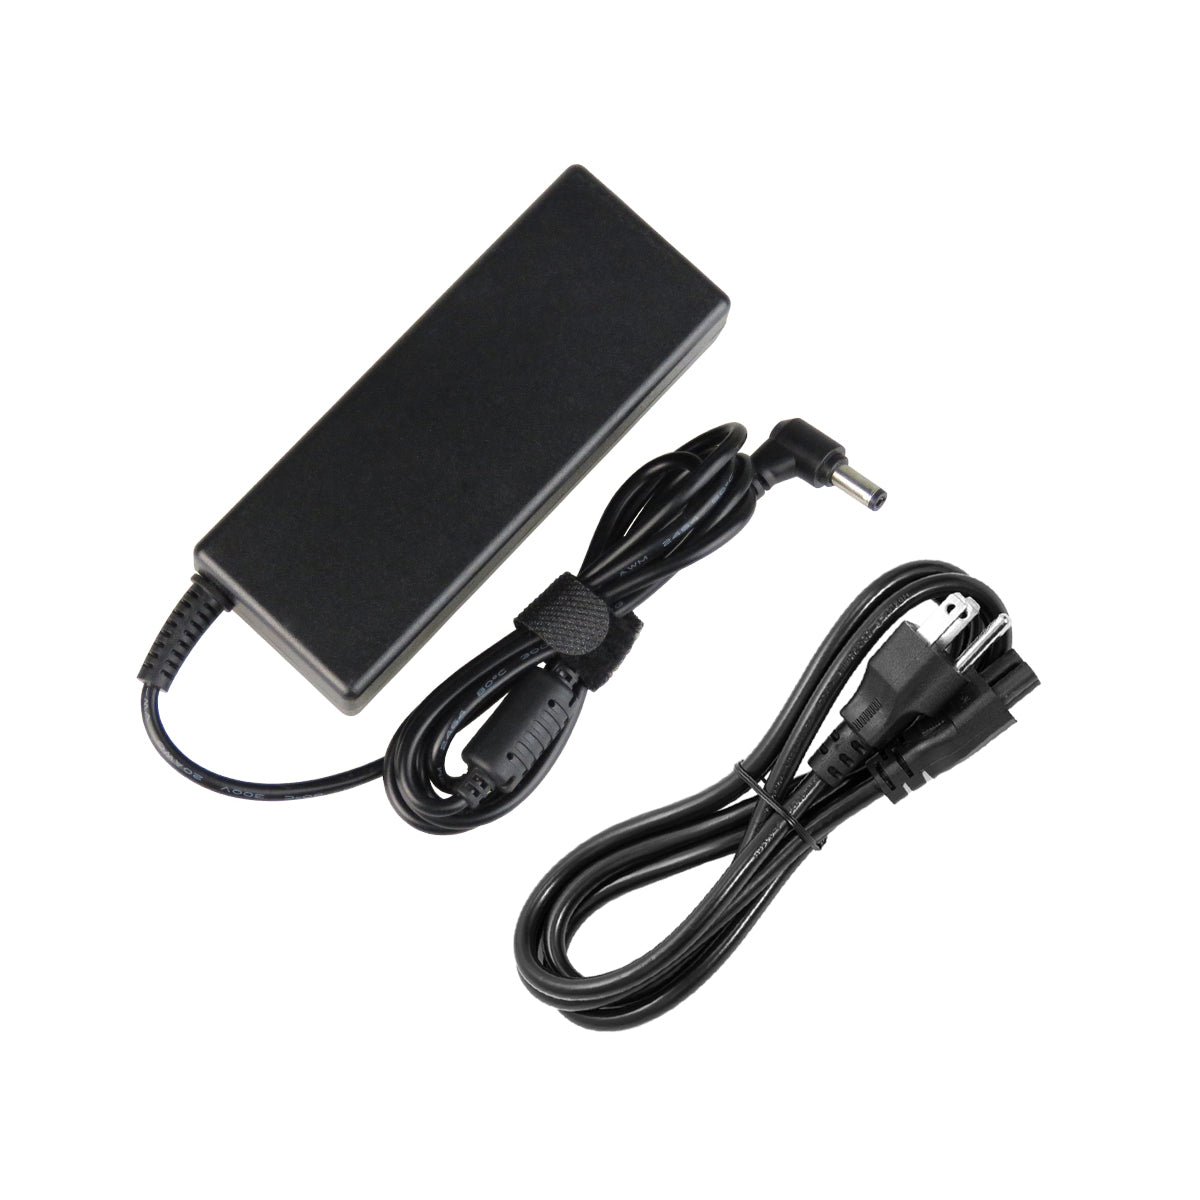 AC Adapter Charger for Gateway 0220A1990 Notebook.